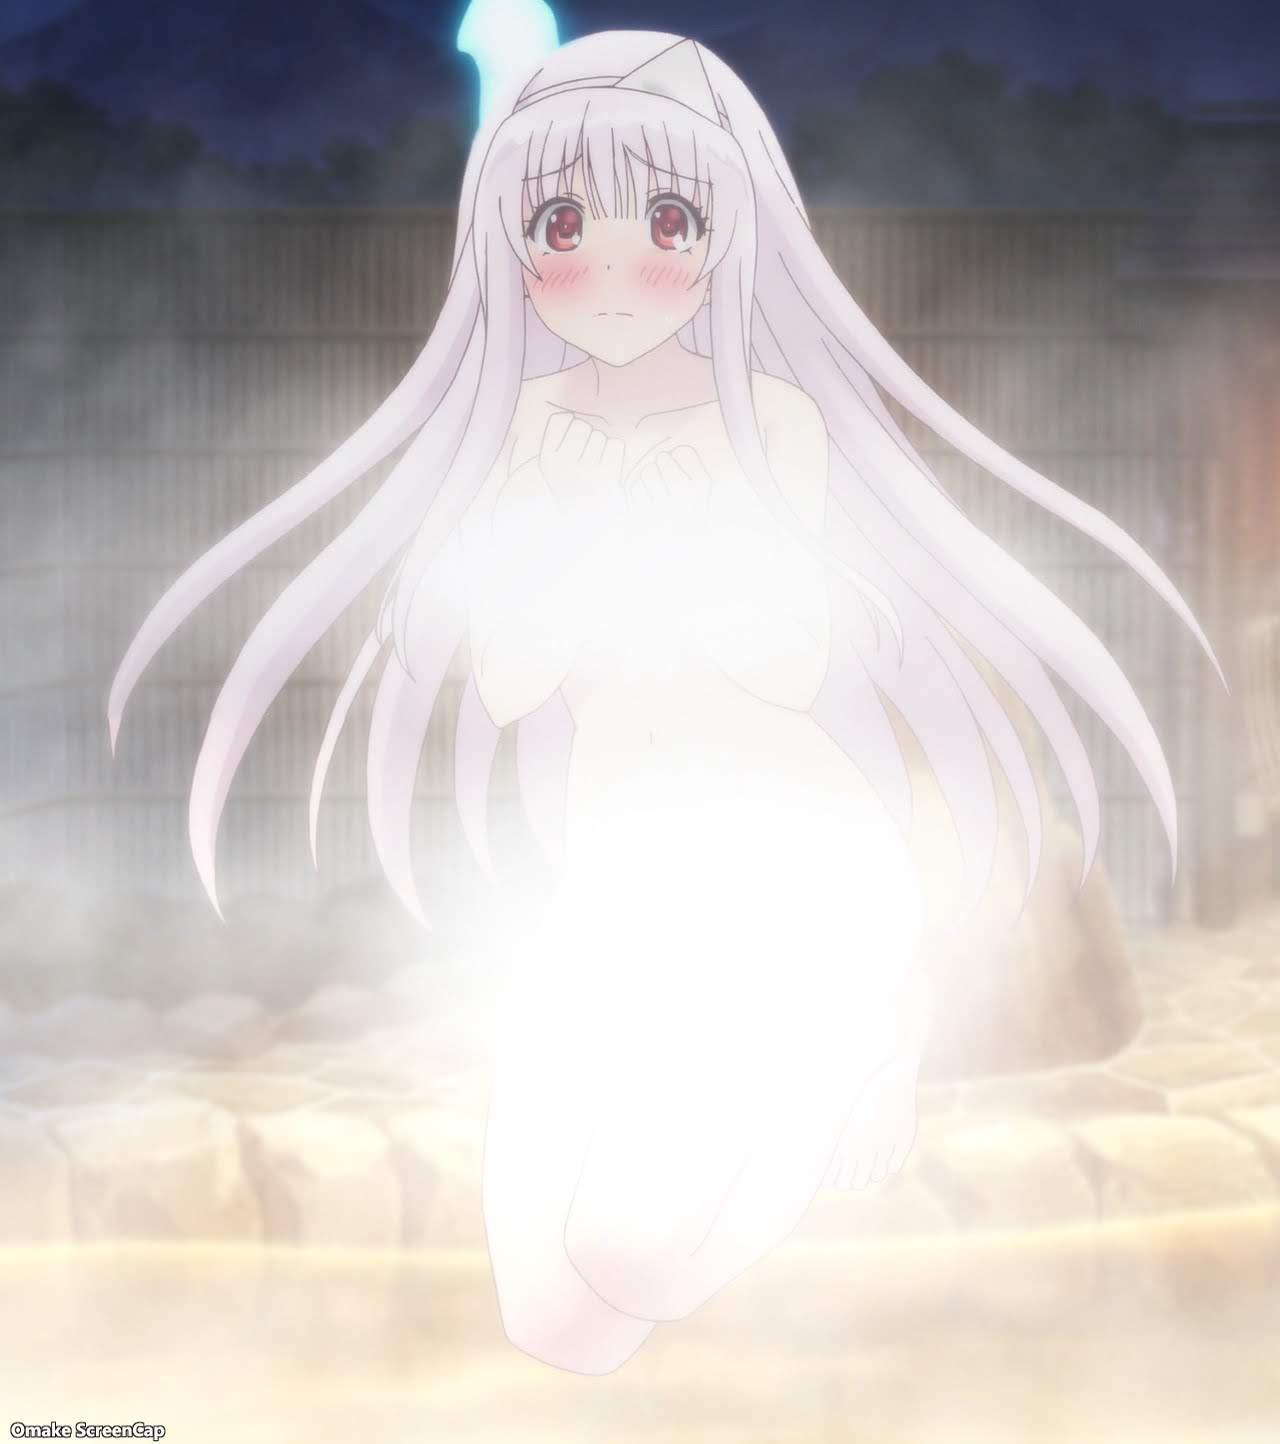 Yuuna and the Haunted Hot Springs Manga to Pack in New Anime Episode